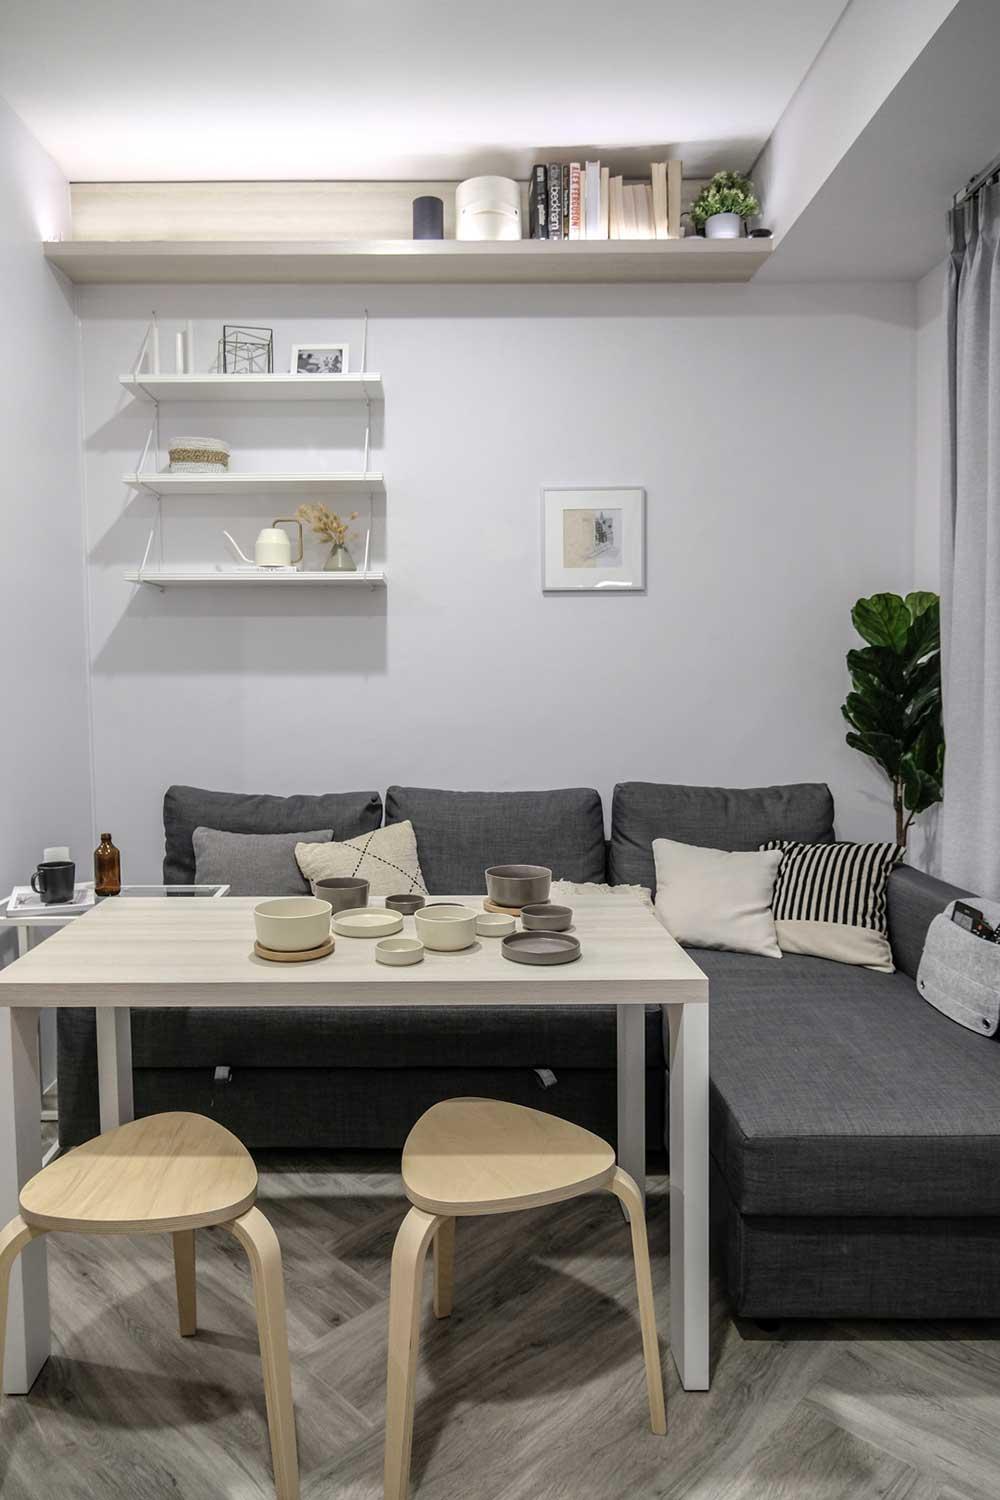 Multifunctional And Simplistic Design Spruce Up This 290-Square-Feet Home